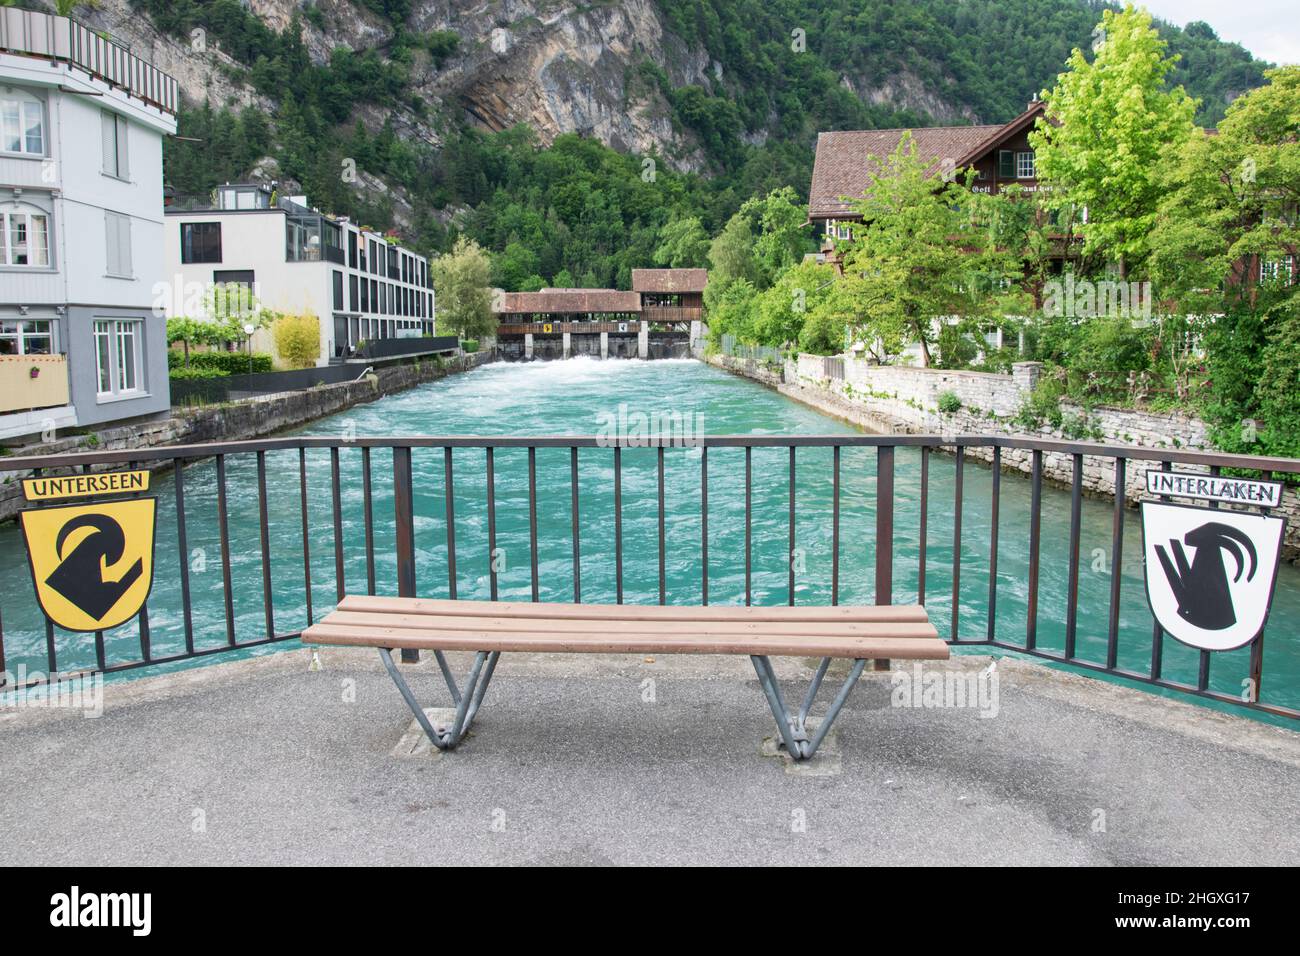 A wooden park bench in the middle of two towns Unterseen and Interlaken on the river with turquoise color Stock Photo